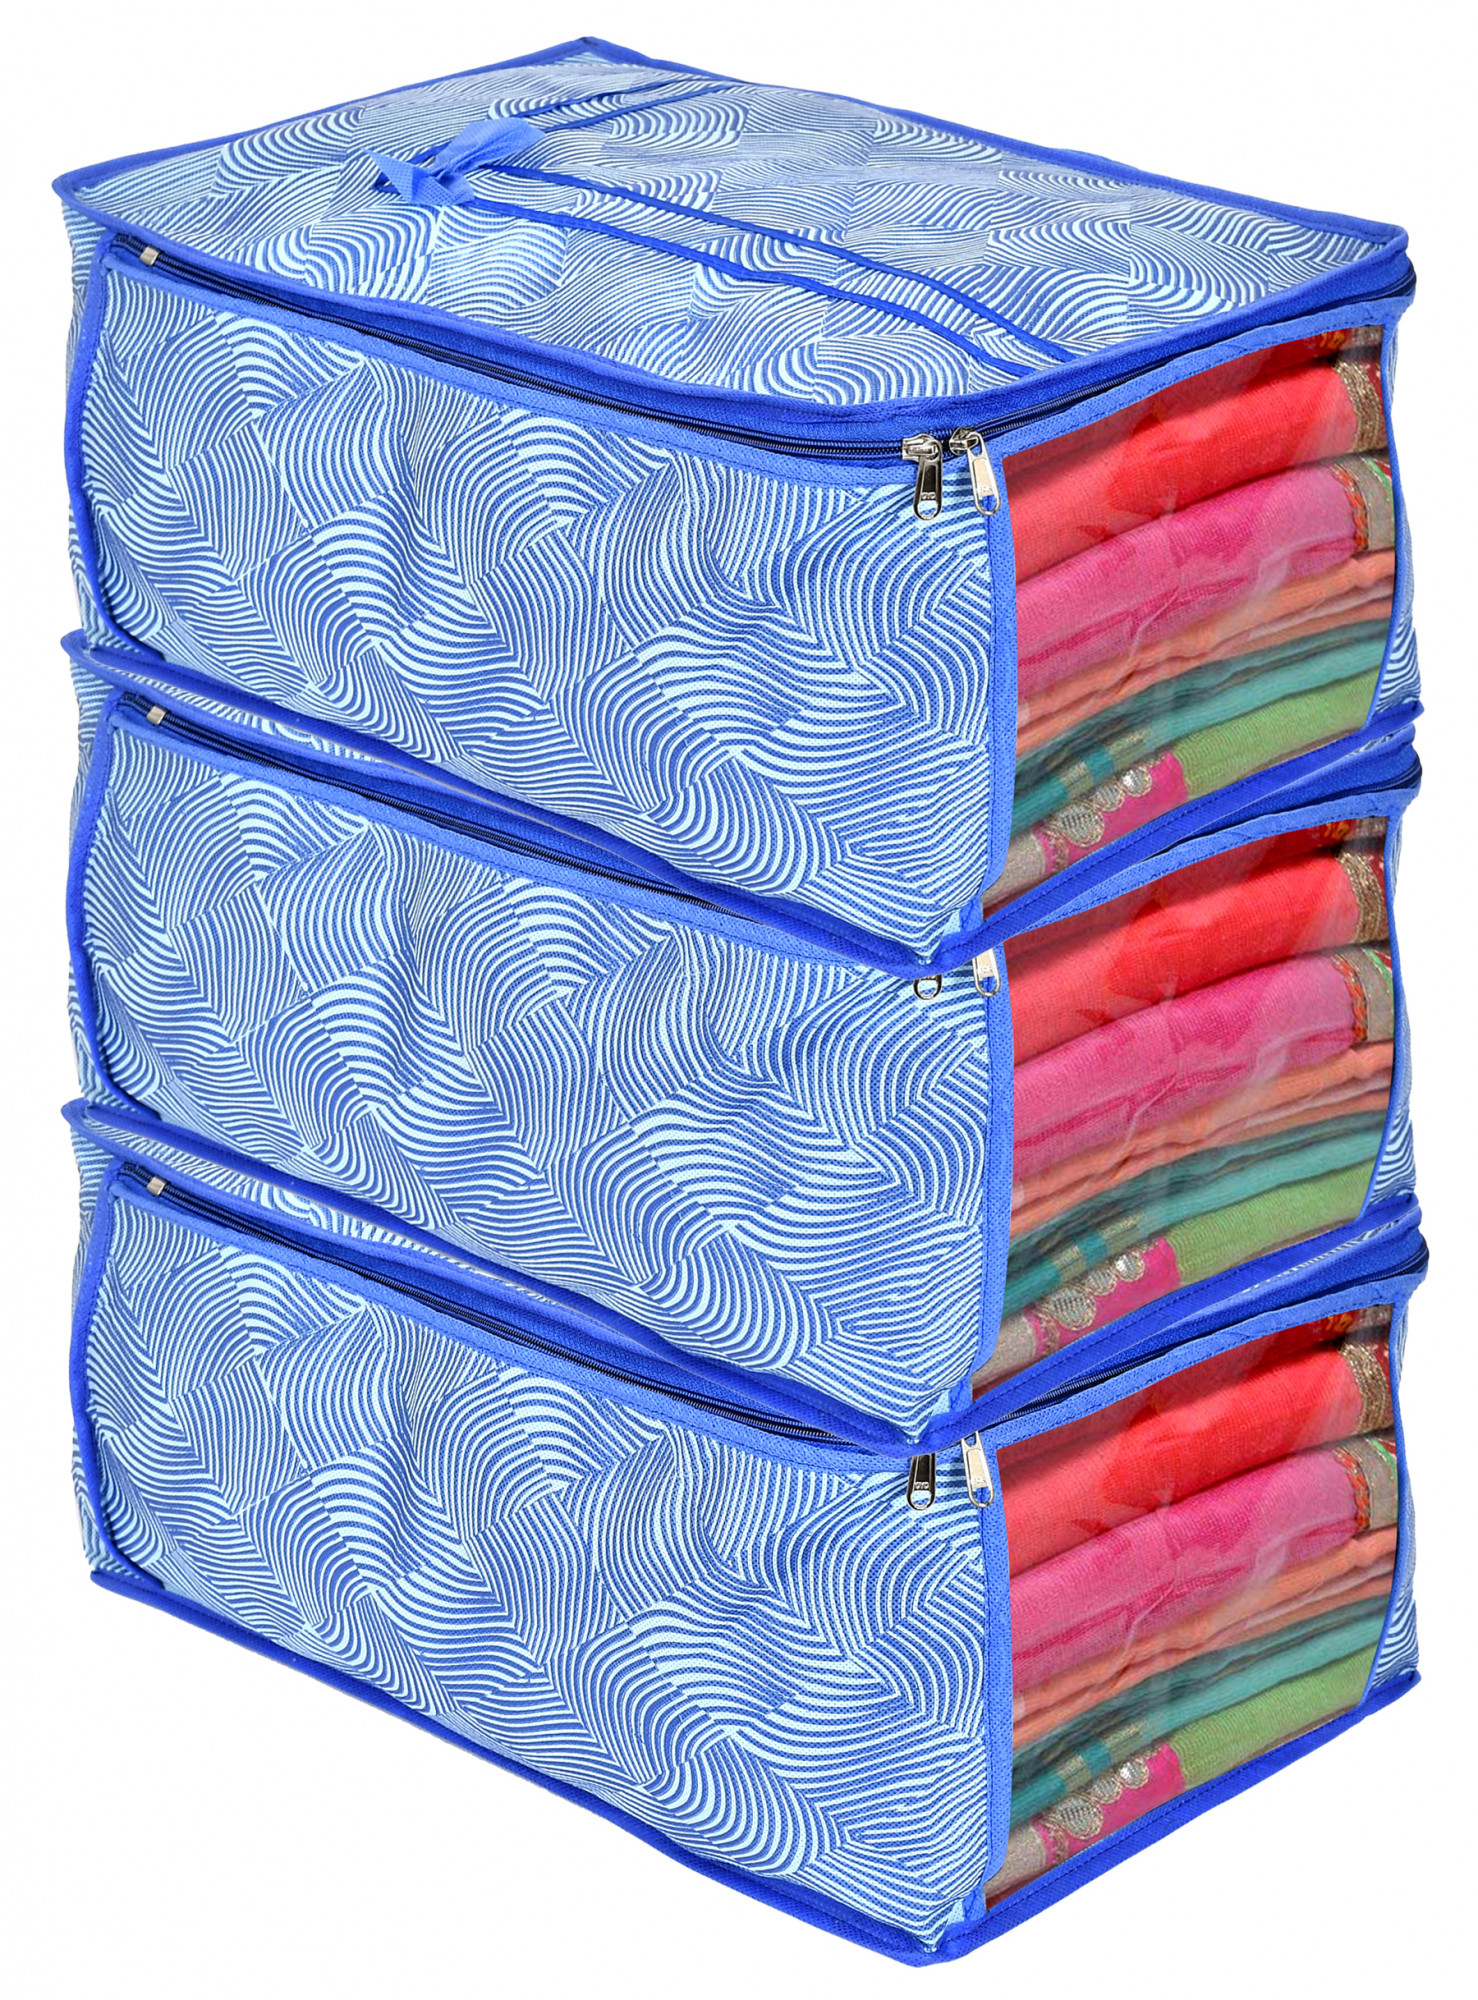 Kuber Industries Metalic Lahariya Print Non Woven Fabric Saree Cover/Clothes Organiser For Wardrobe Set with Transparent Window, Extra Large (Blue)